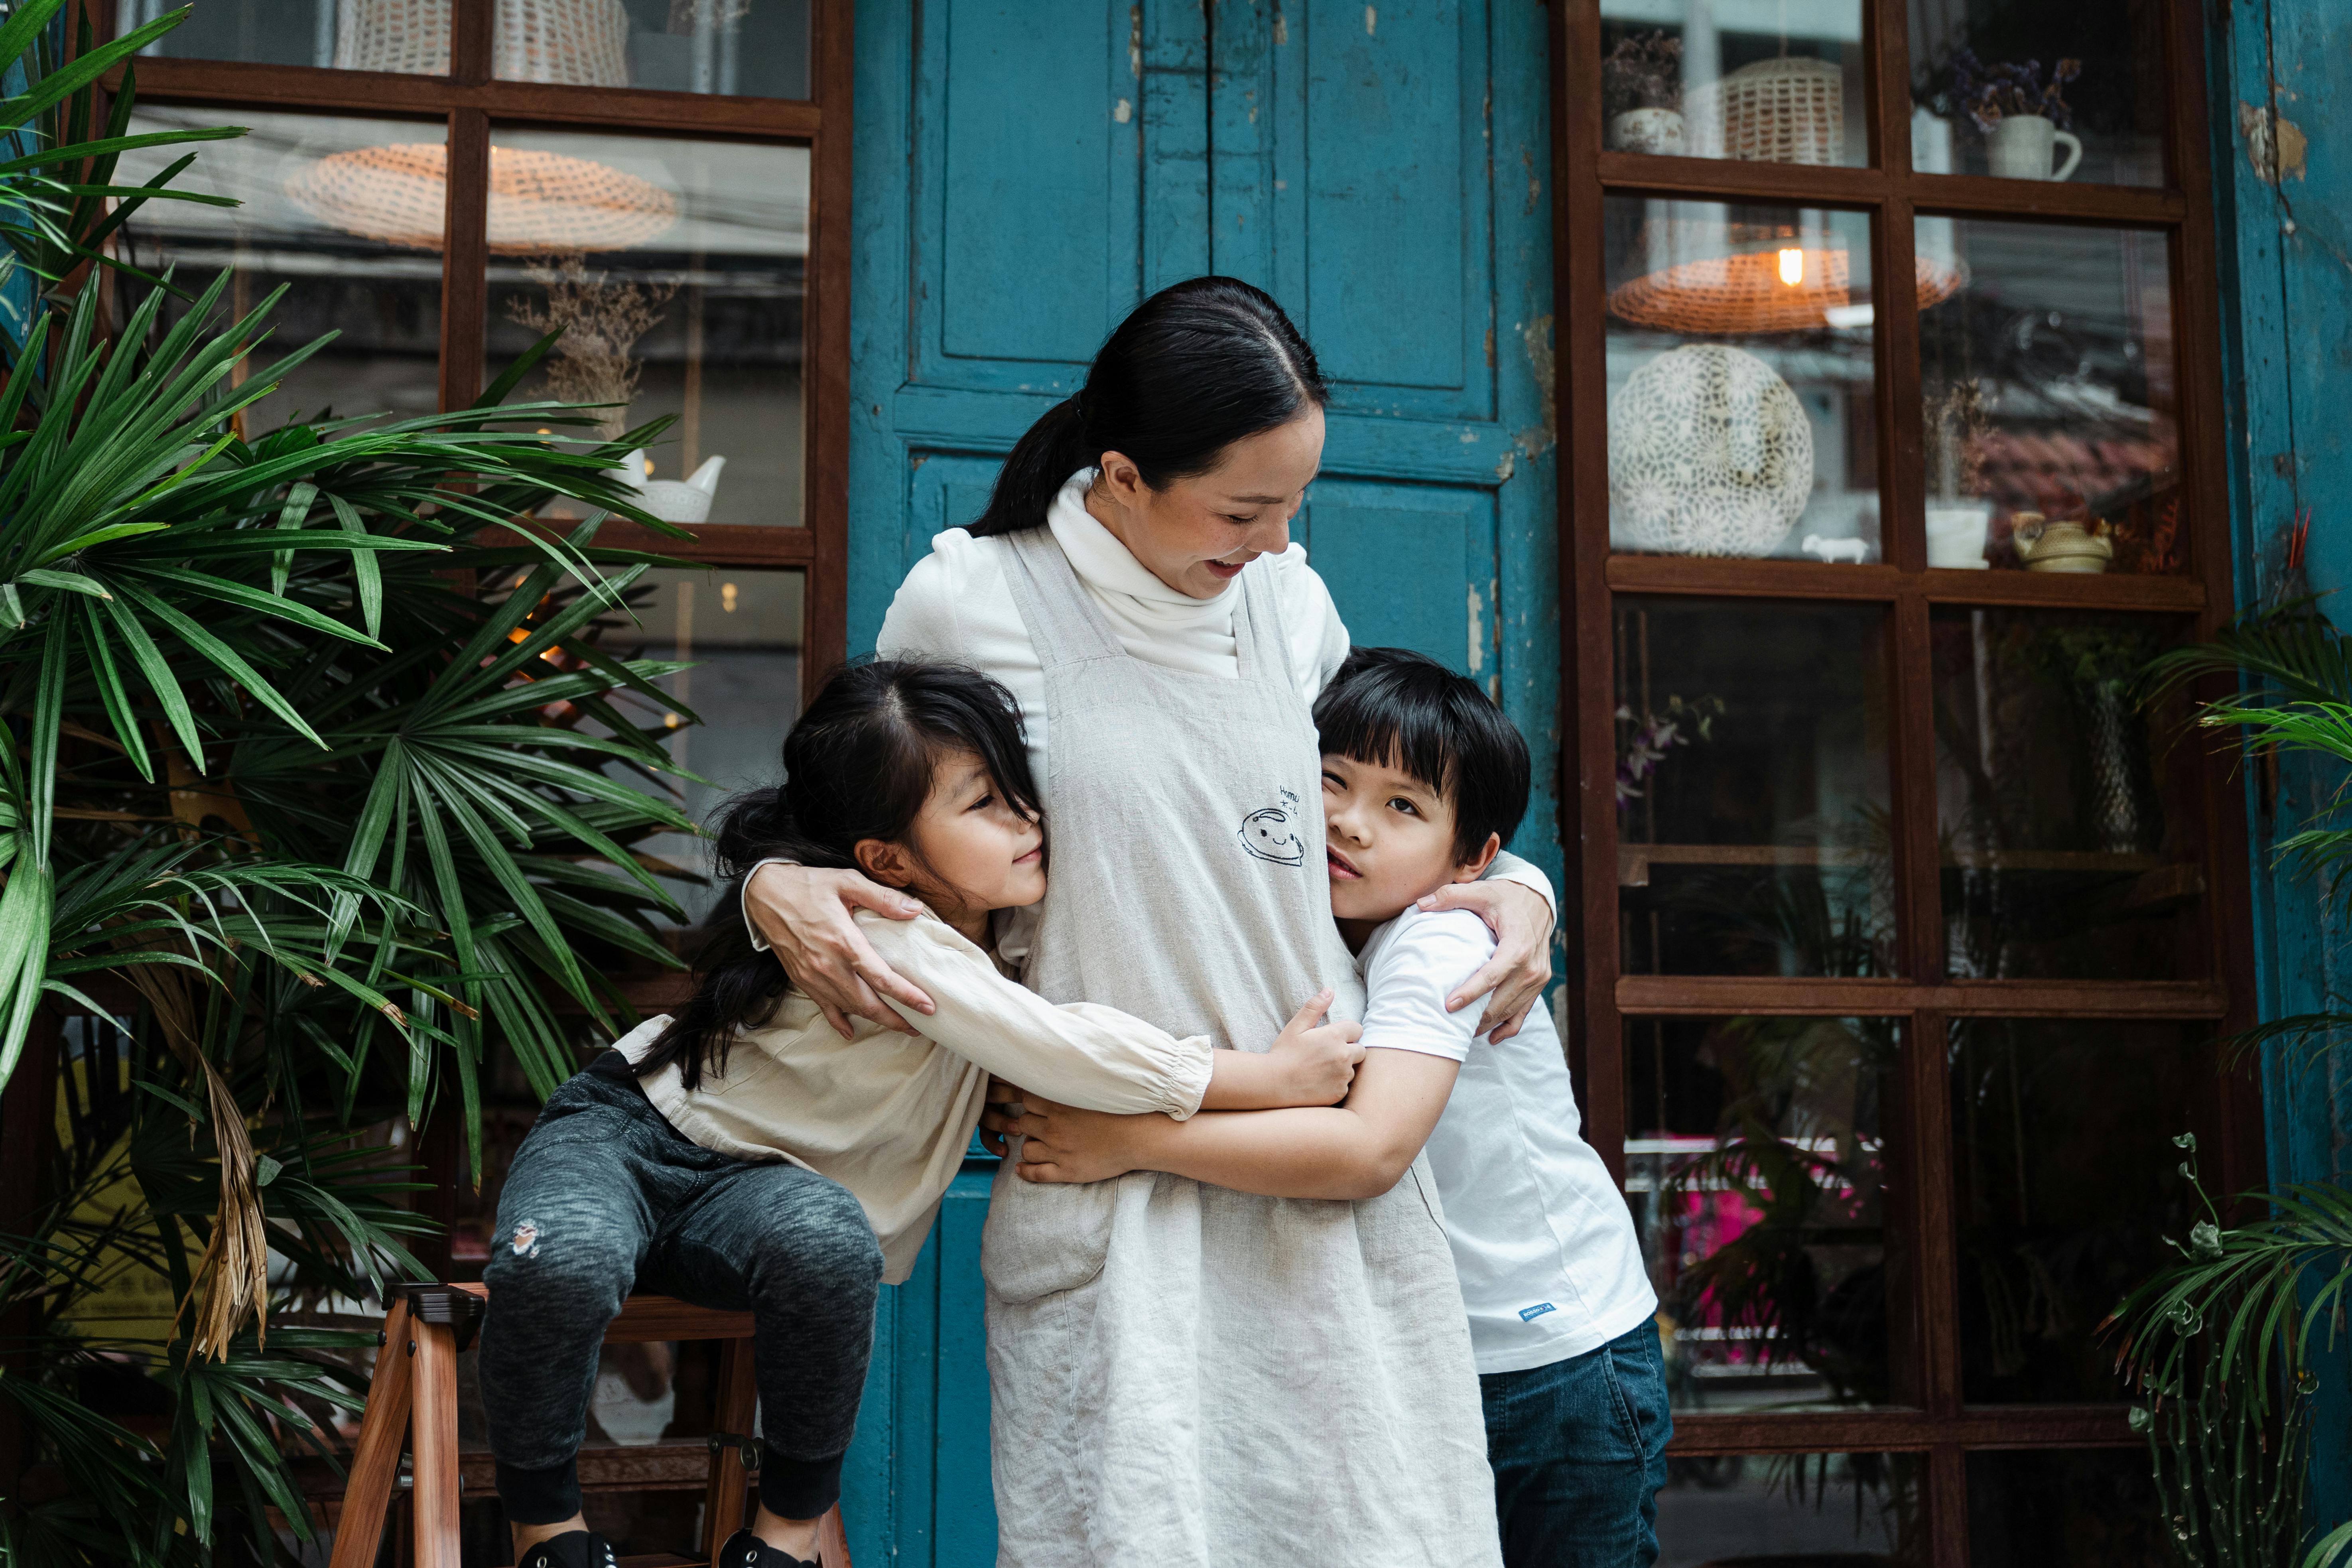 A woman embracing two young children | Source: Pexels